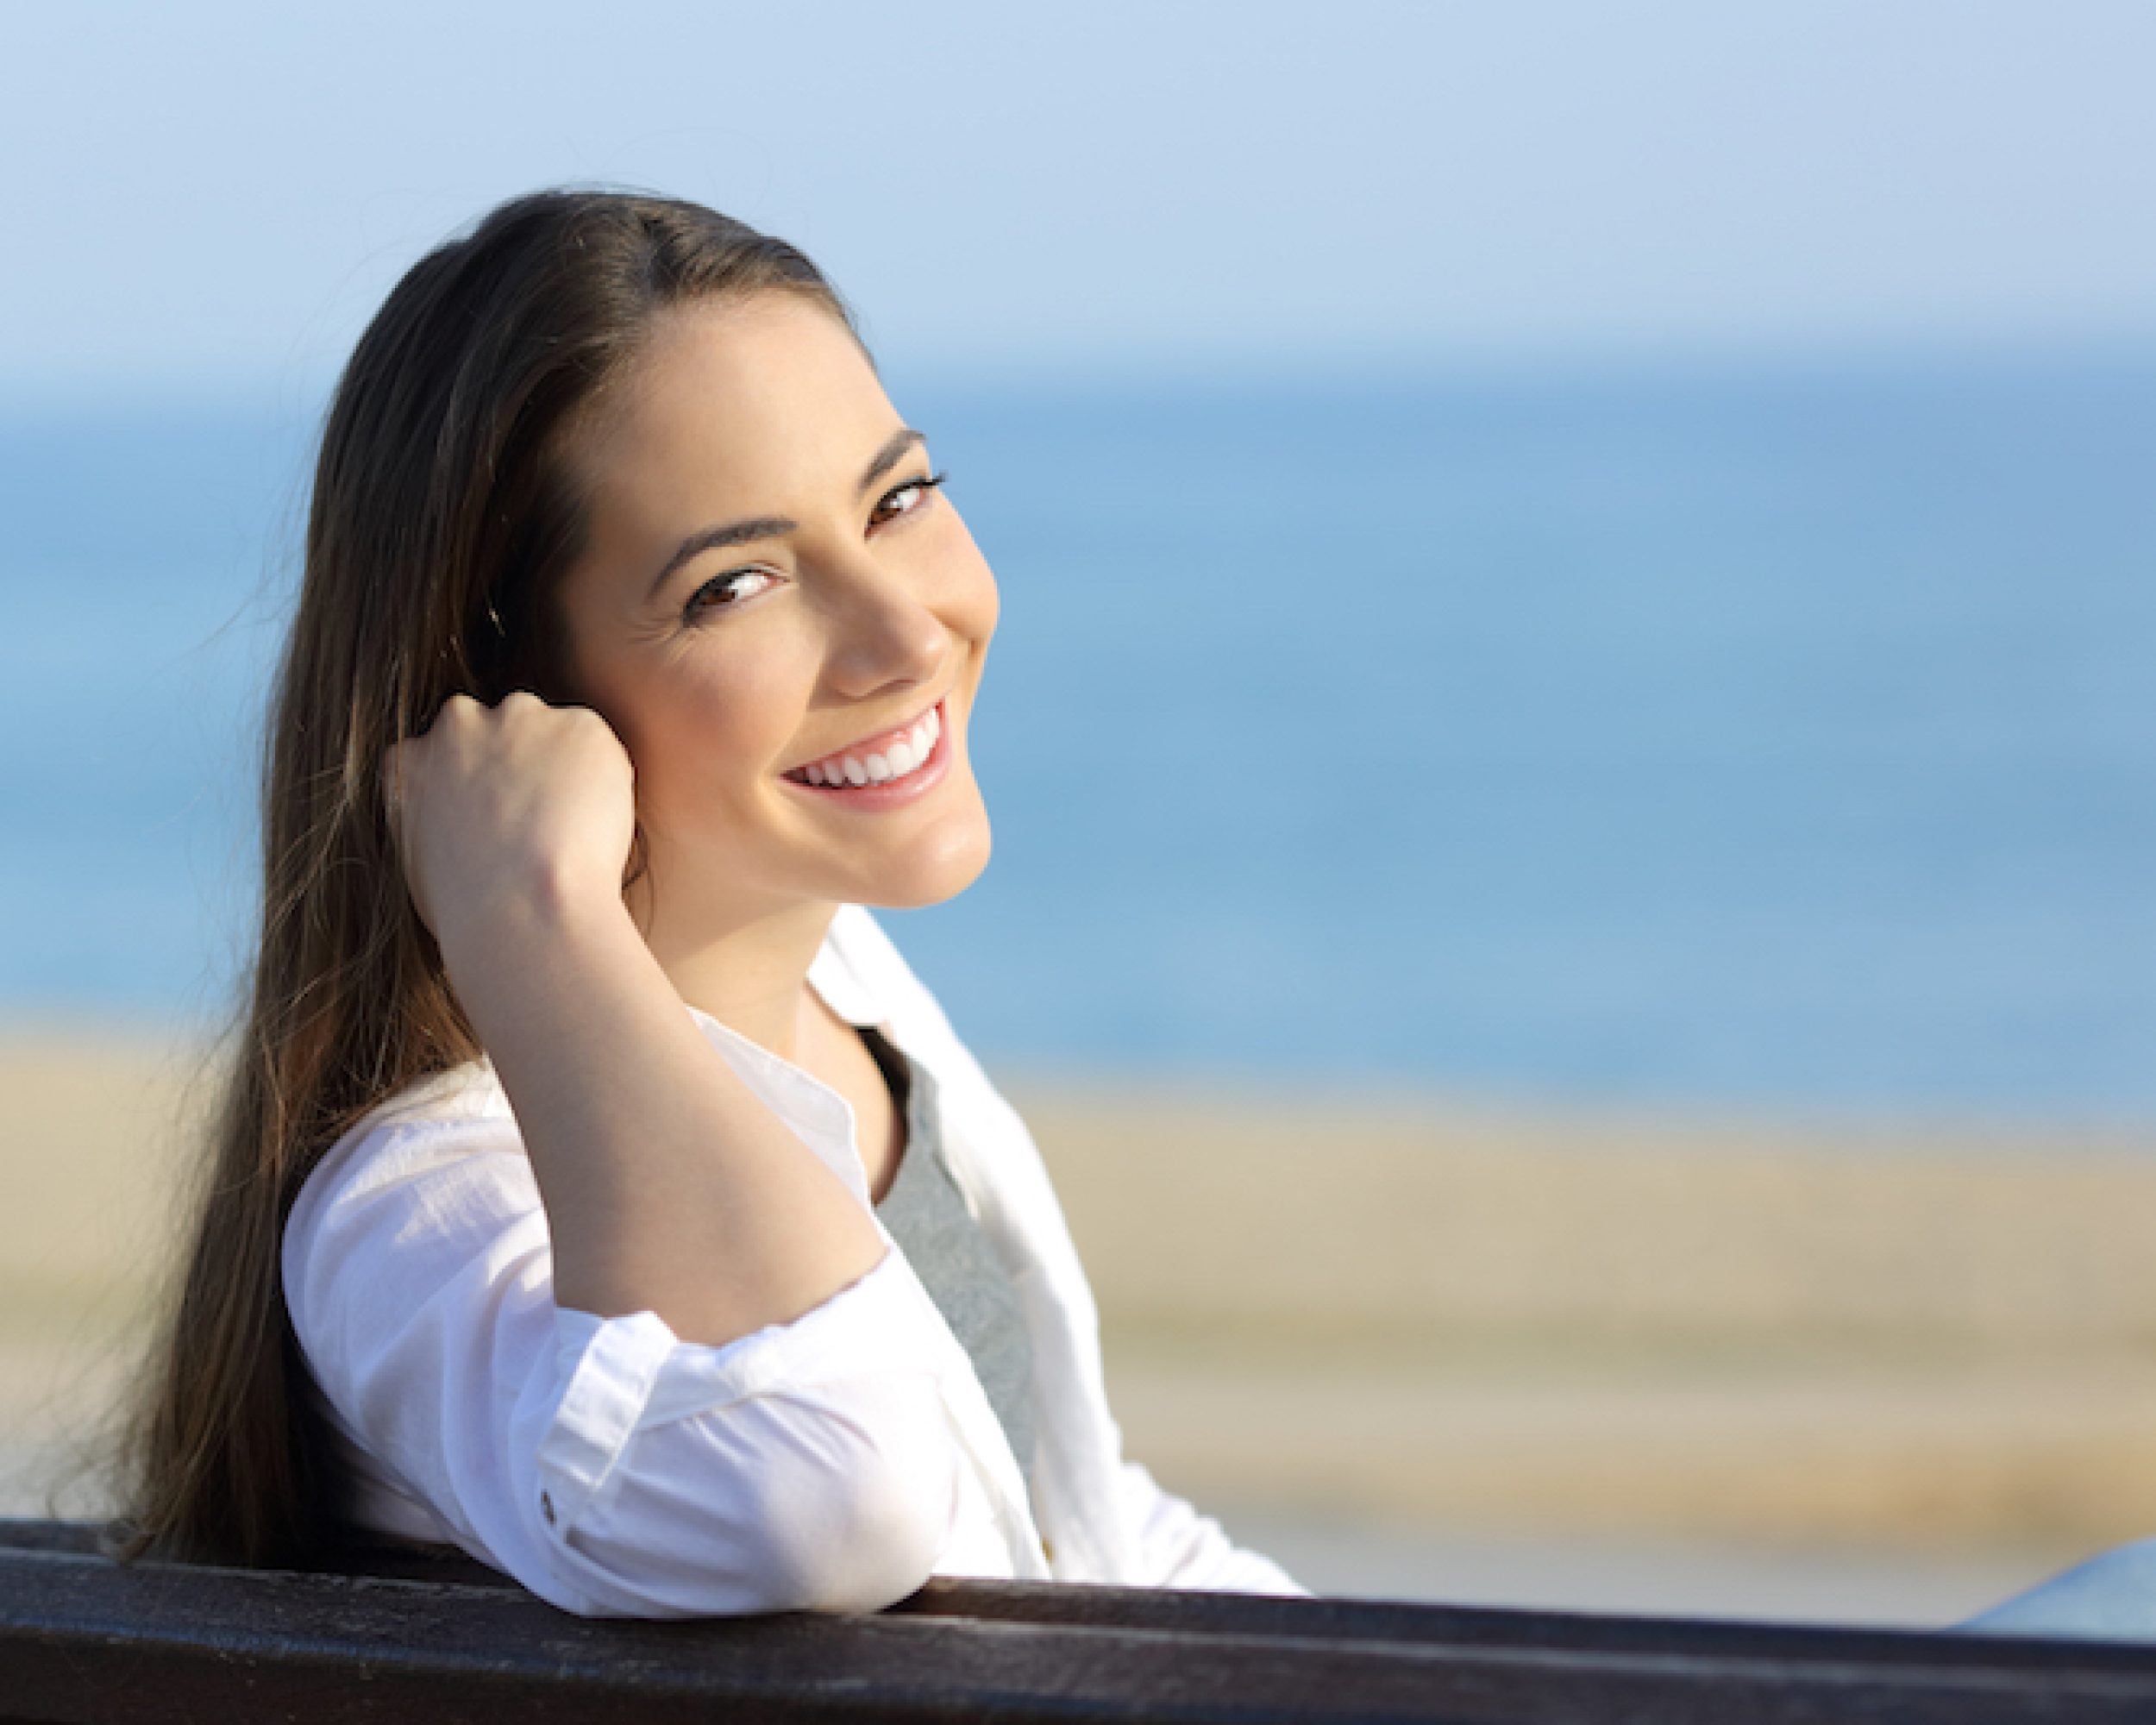 Portrait of a beauty woman smiling at camera sitting on a bench on the beach